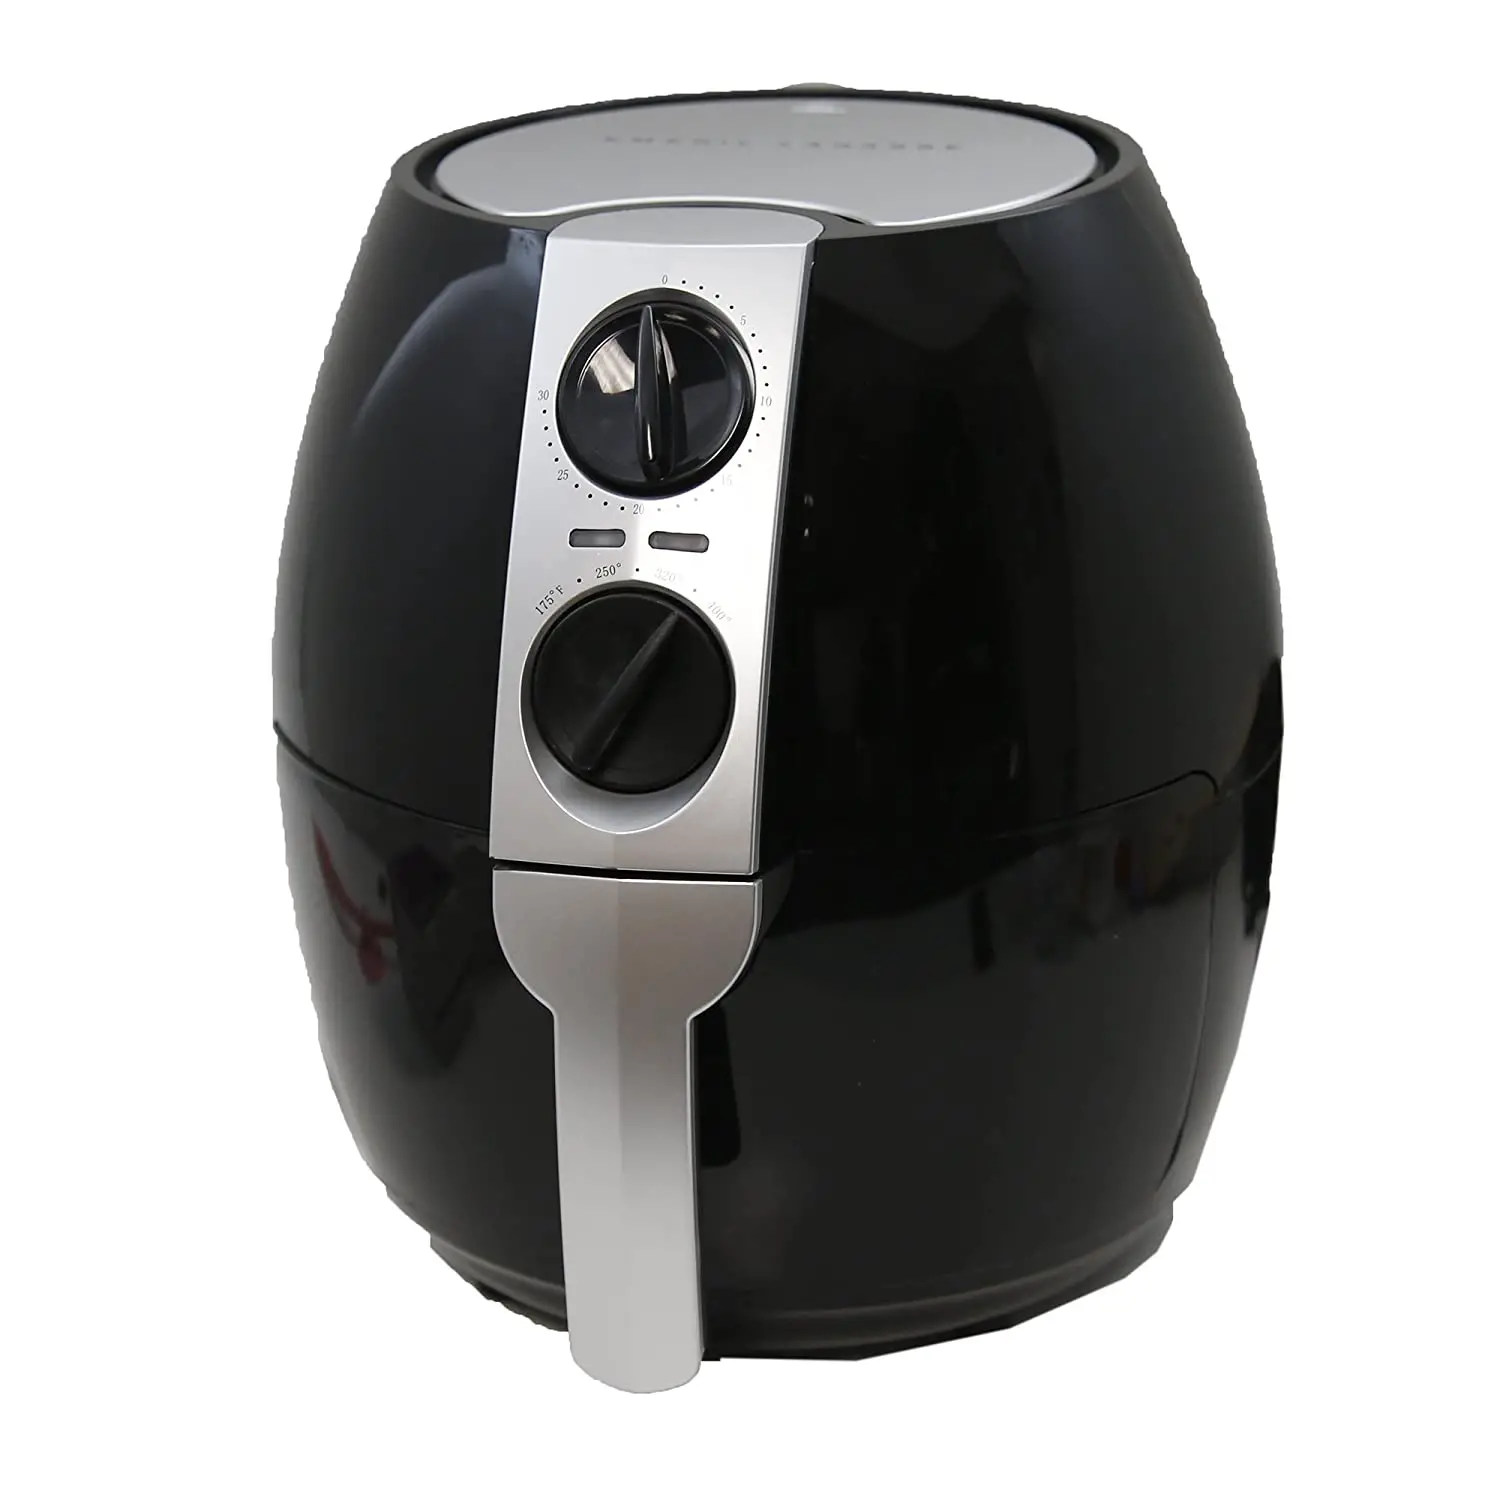 Which Is The Best Emeril Lagasse Air Fryer Pro System